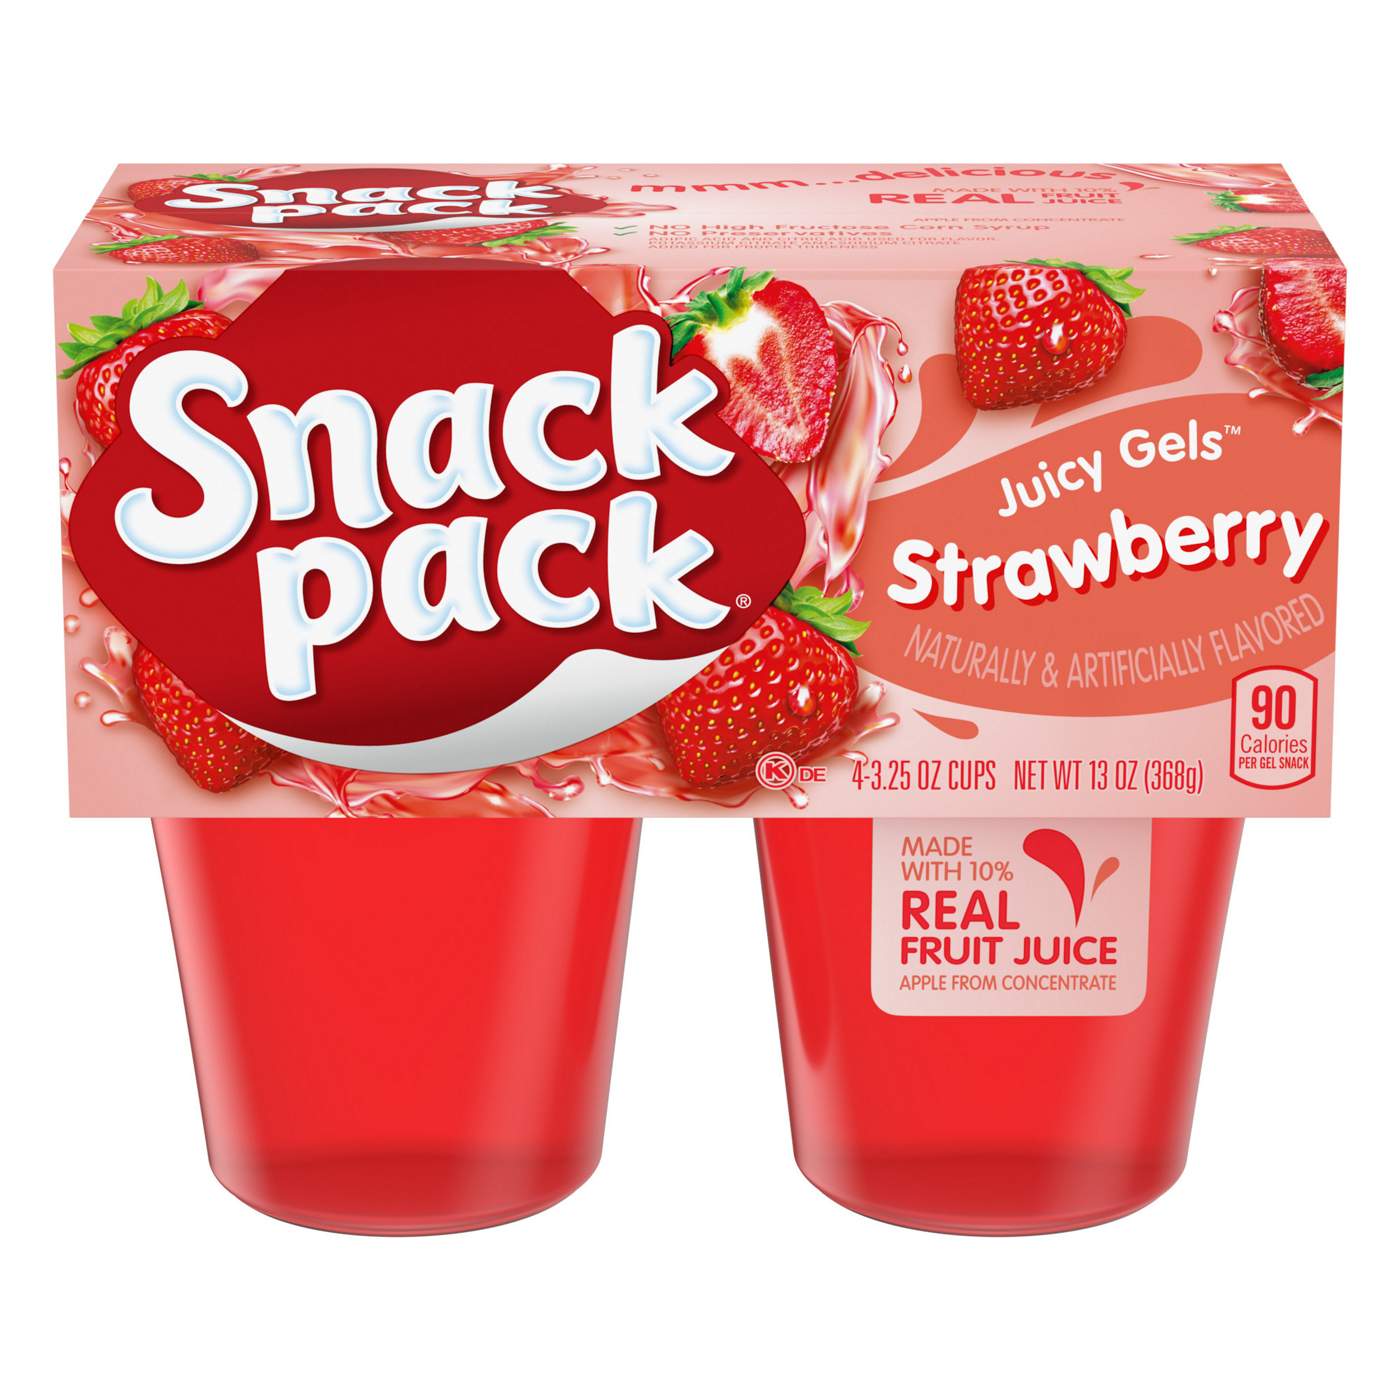 Snack Pack Strawberry Juicy Gels Cups; image 1 of 7